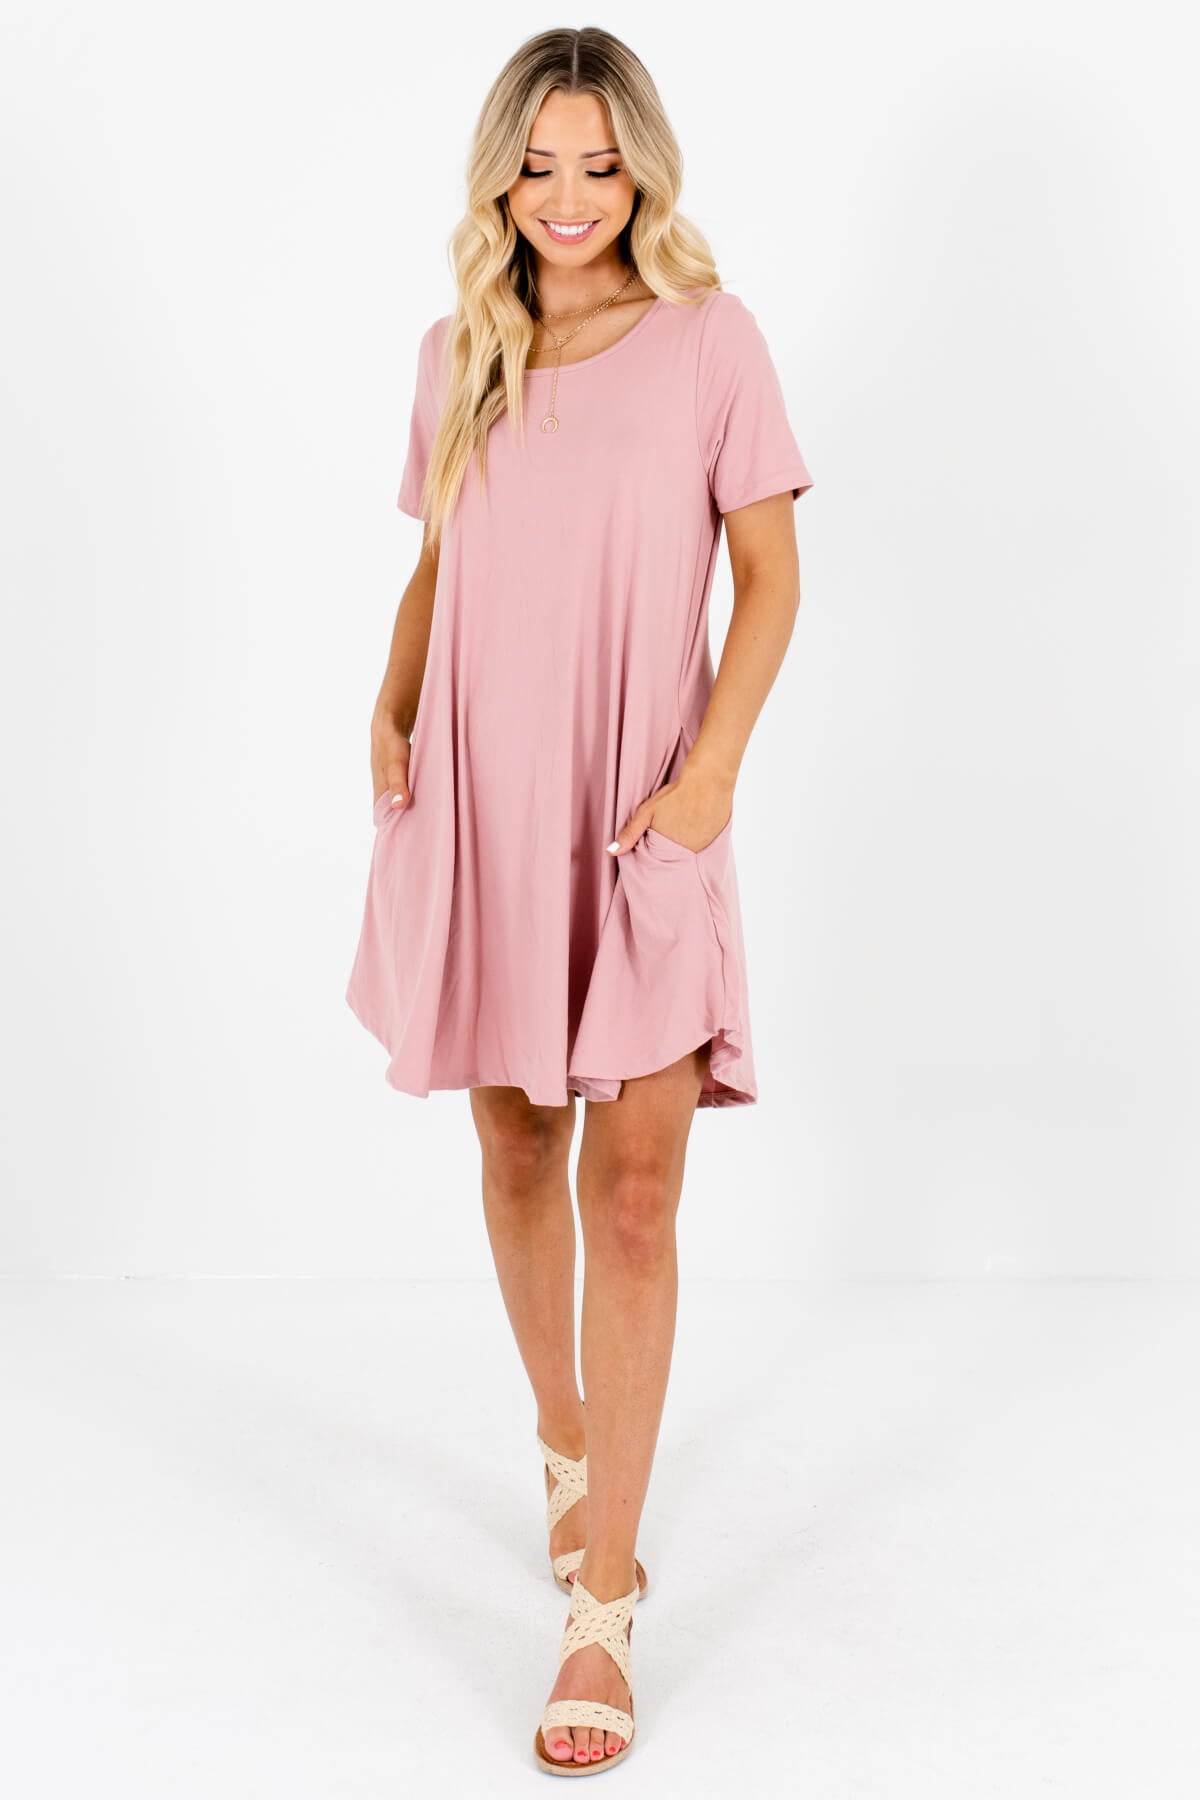 Pink Soft Stretchy Comfy Boutique Mini Dresses with Pockets